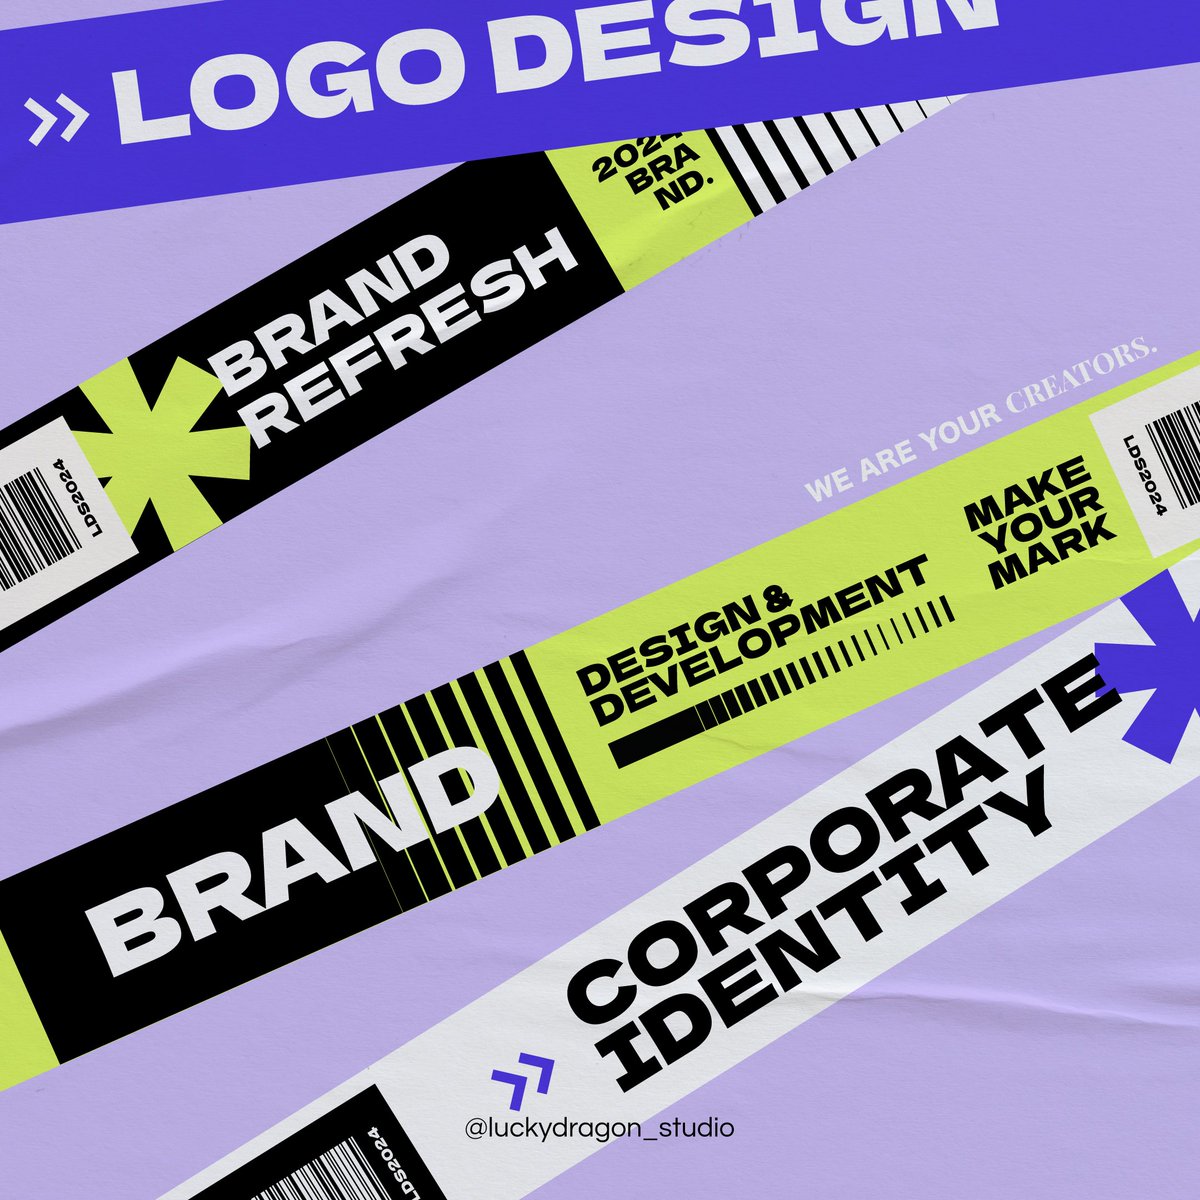 Whether you’re starting from scratch or looking to refresh your existing brand, we’ve got you covered! 🚀✨

#designstudio #designagency #creativestudio #brandservices #brand #branddesign #rebrand #brandrefresh #designmatters #designtrends